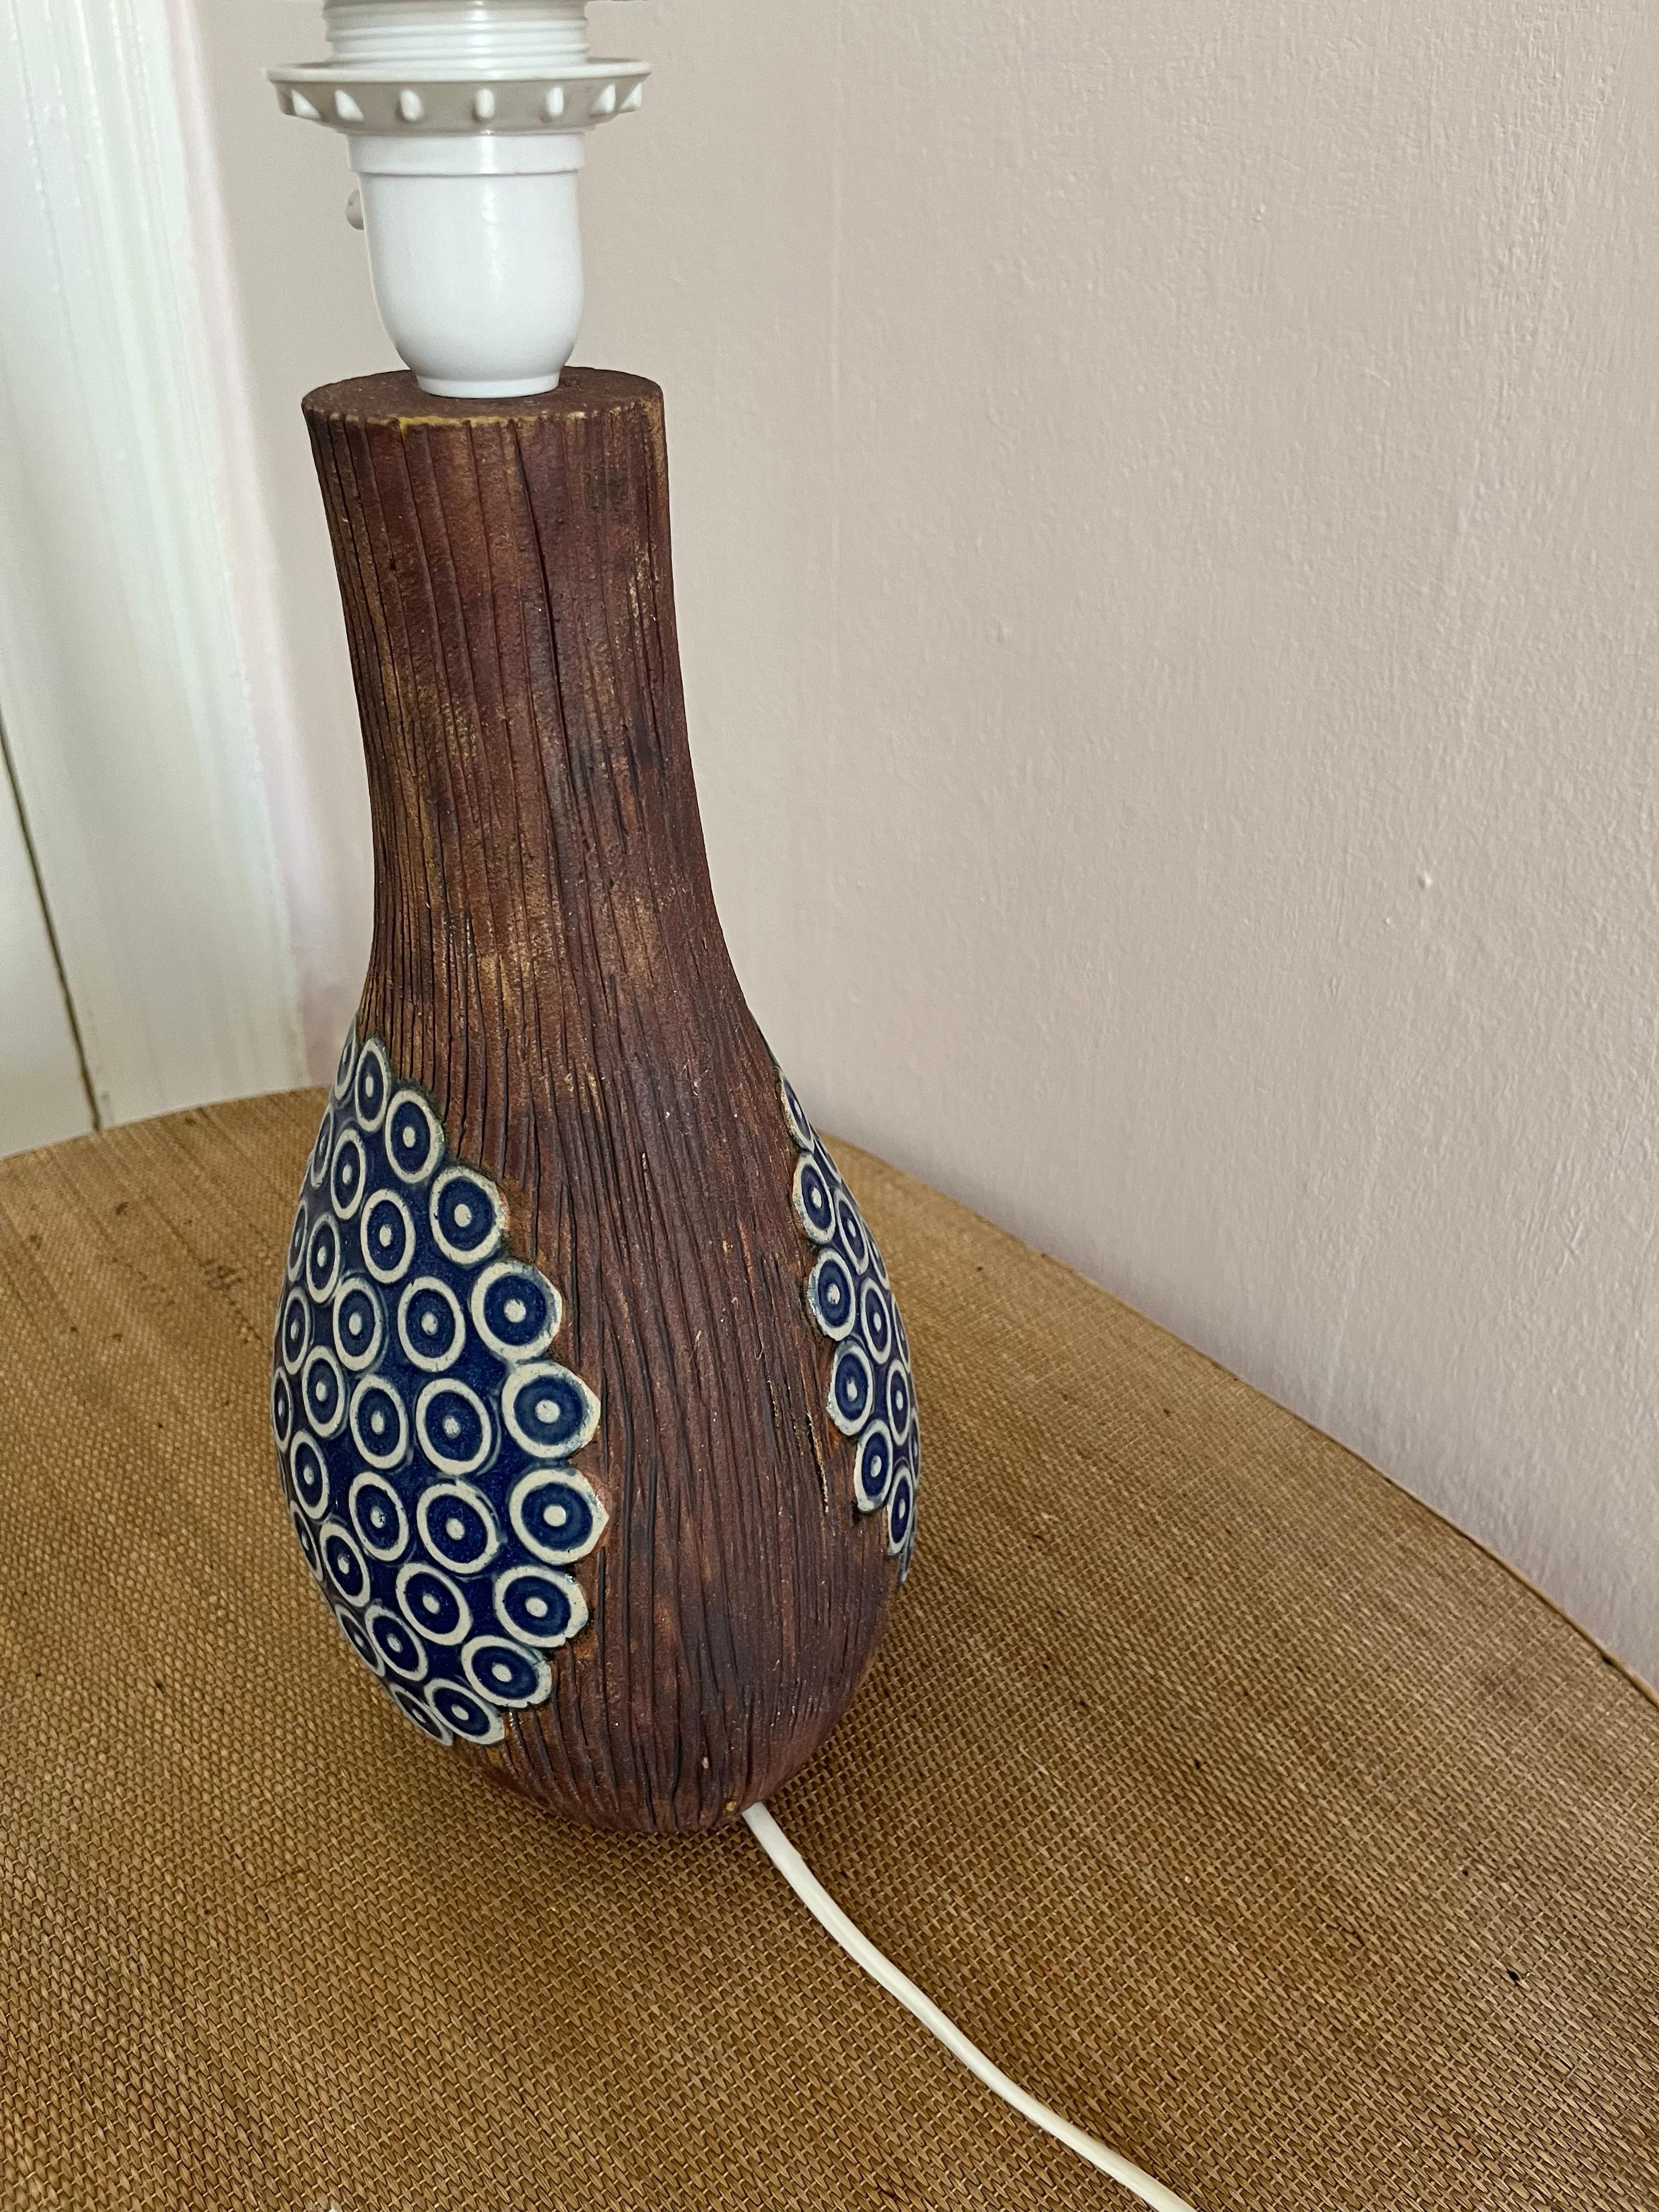 1970s decorated ceramic table lamp from Swedish Ego Stengods In Good Condition For Sale In Frederiksberg C, DK